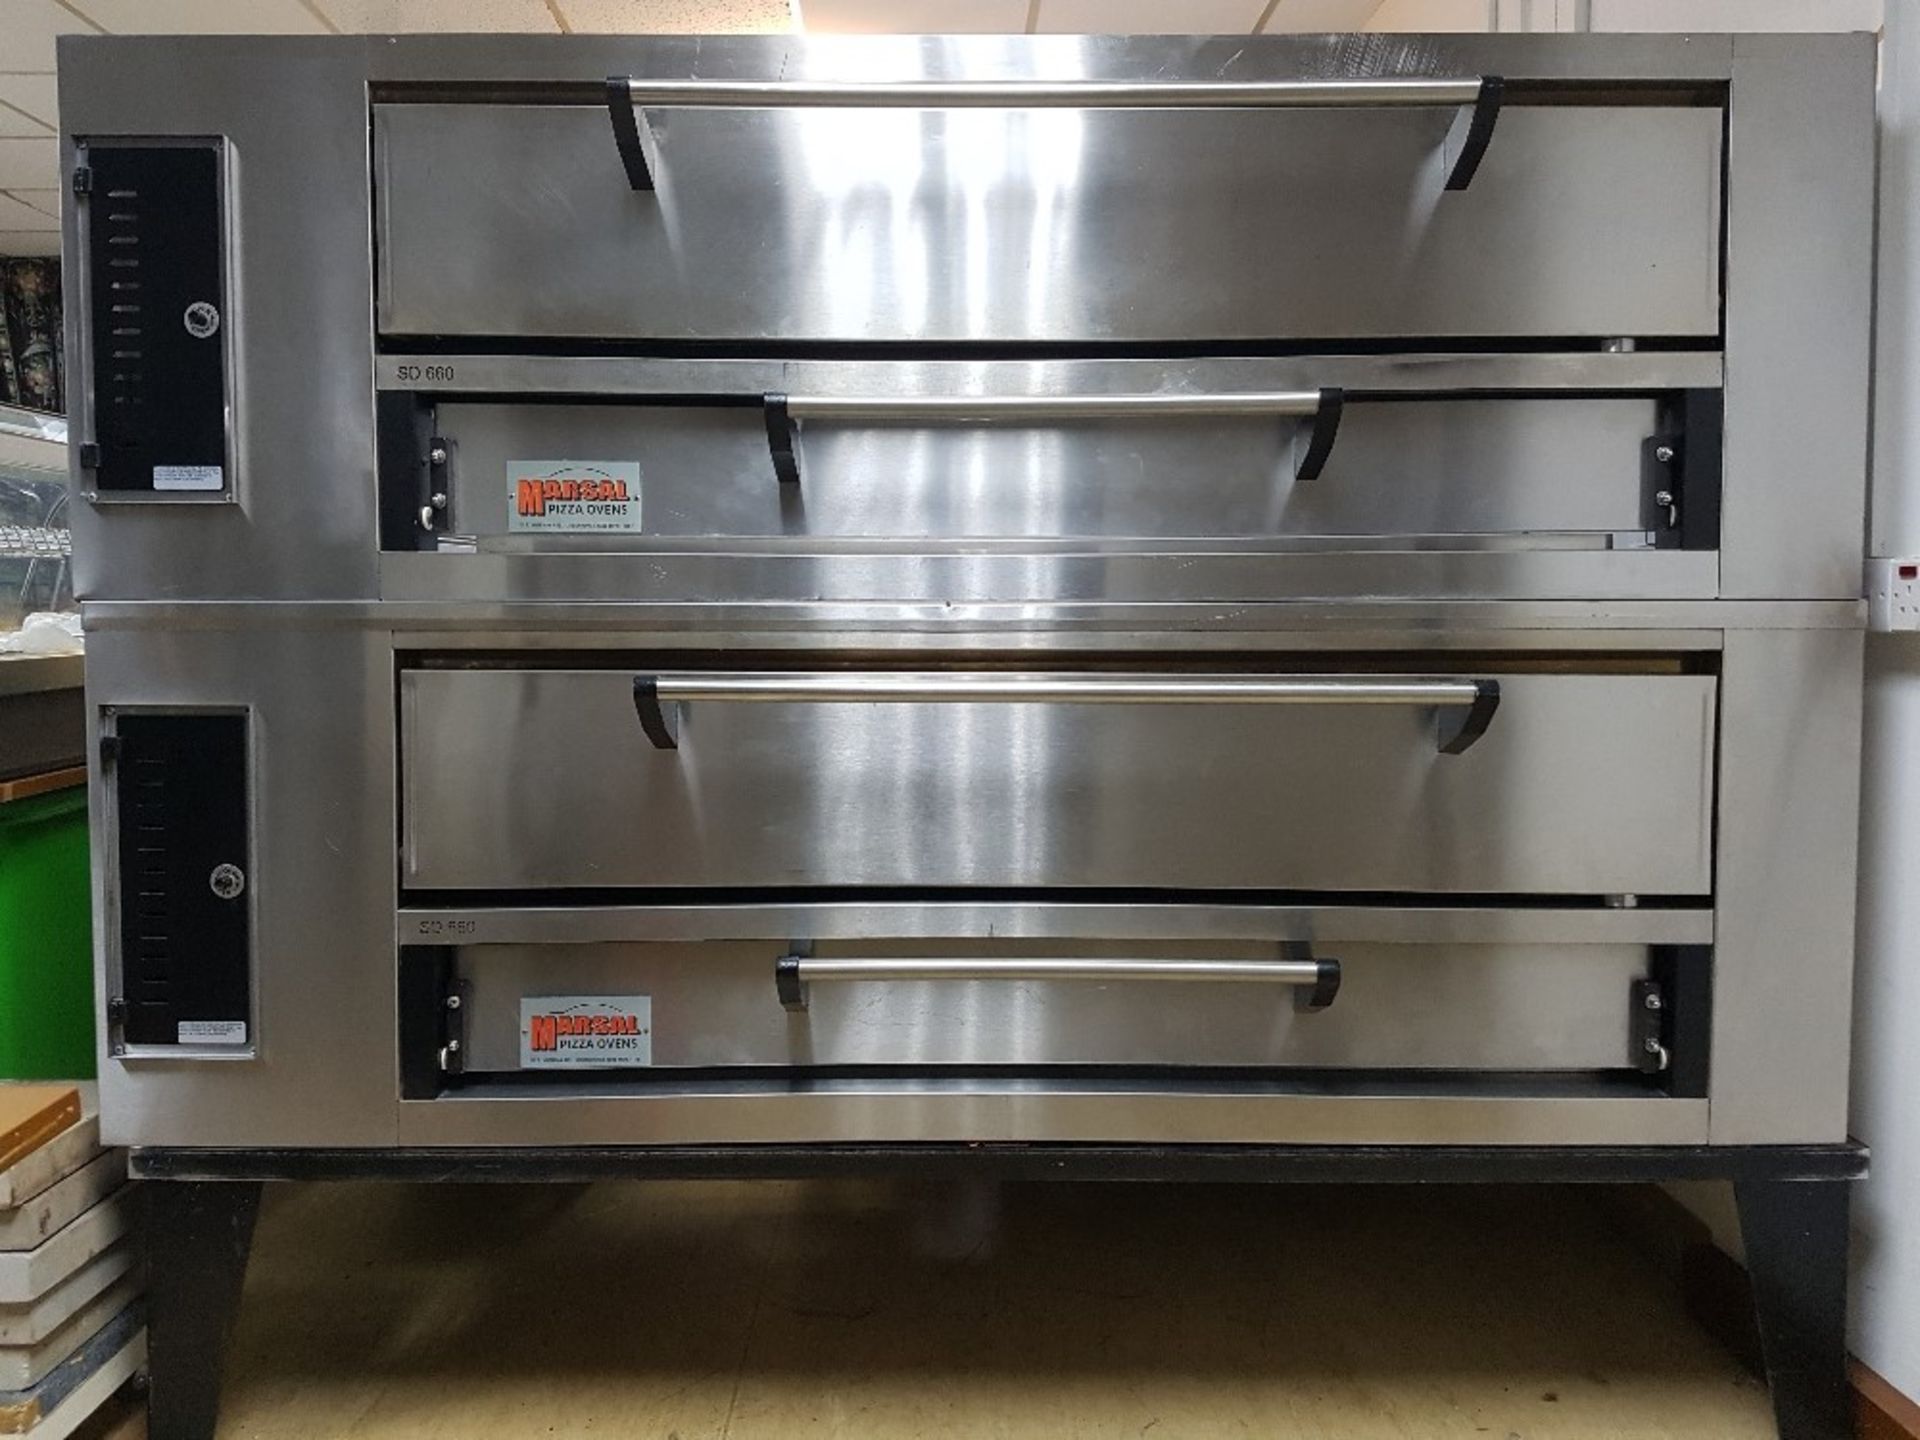 Marsal SD-660 Gas Deck Oven – Double Stack with Standing Stainless Steel – Bakes 12 x 18” Pizza - Image 2 of 2